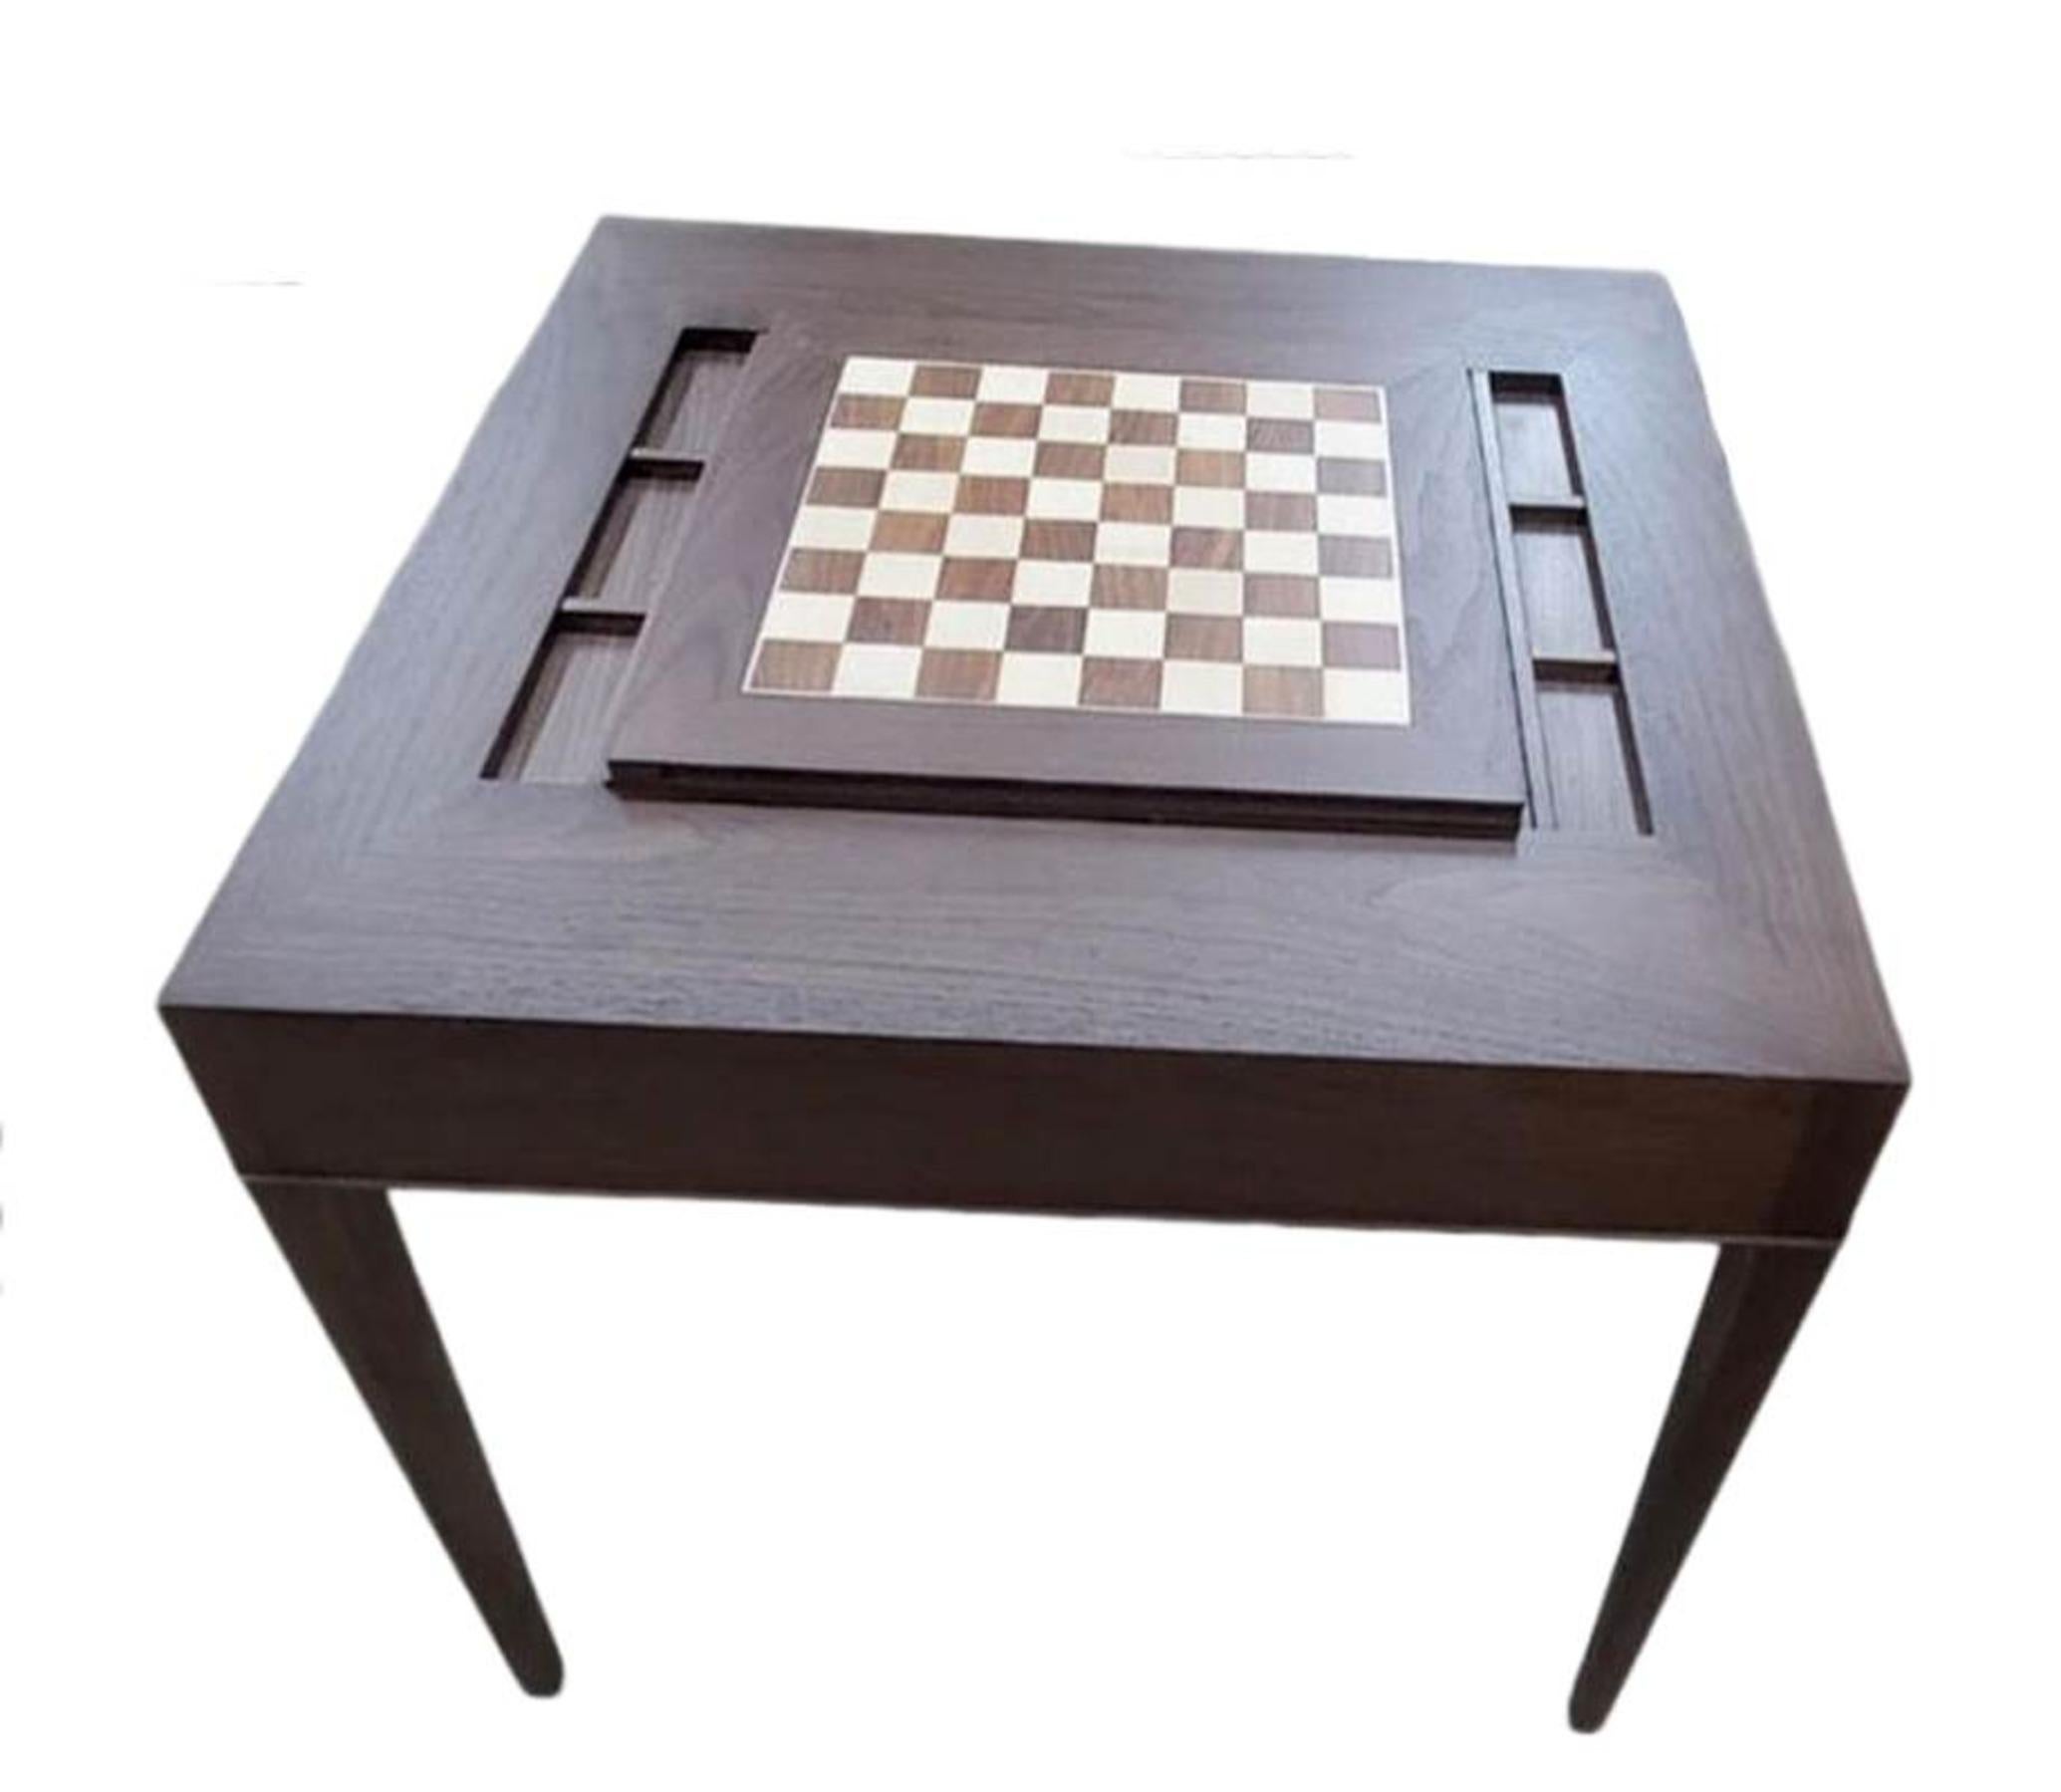 Custom walnut or mahogany table with removable top that exposes the backgammon board. The top can be flipped over to expose the chess board. Perfect size to play cards, poker, board games etc. The marquetry is integrated into the top. Can be made in